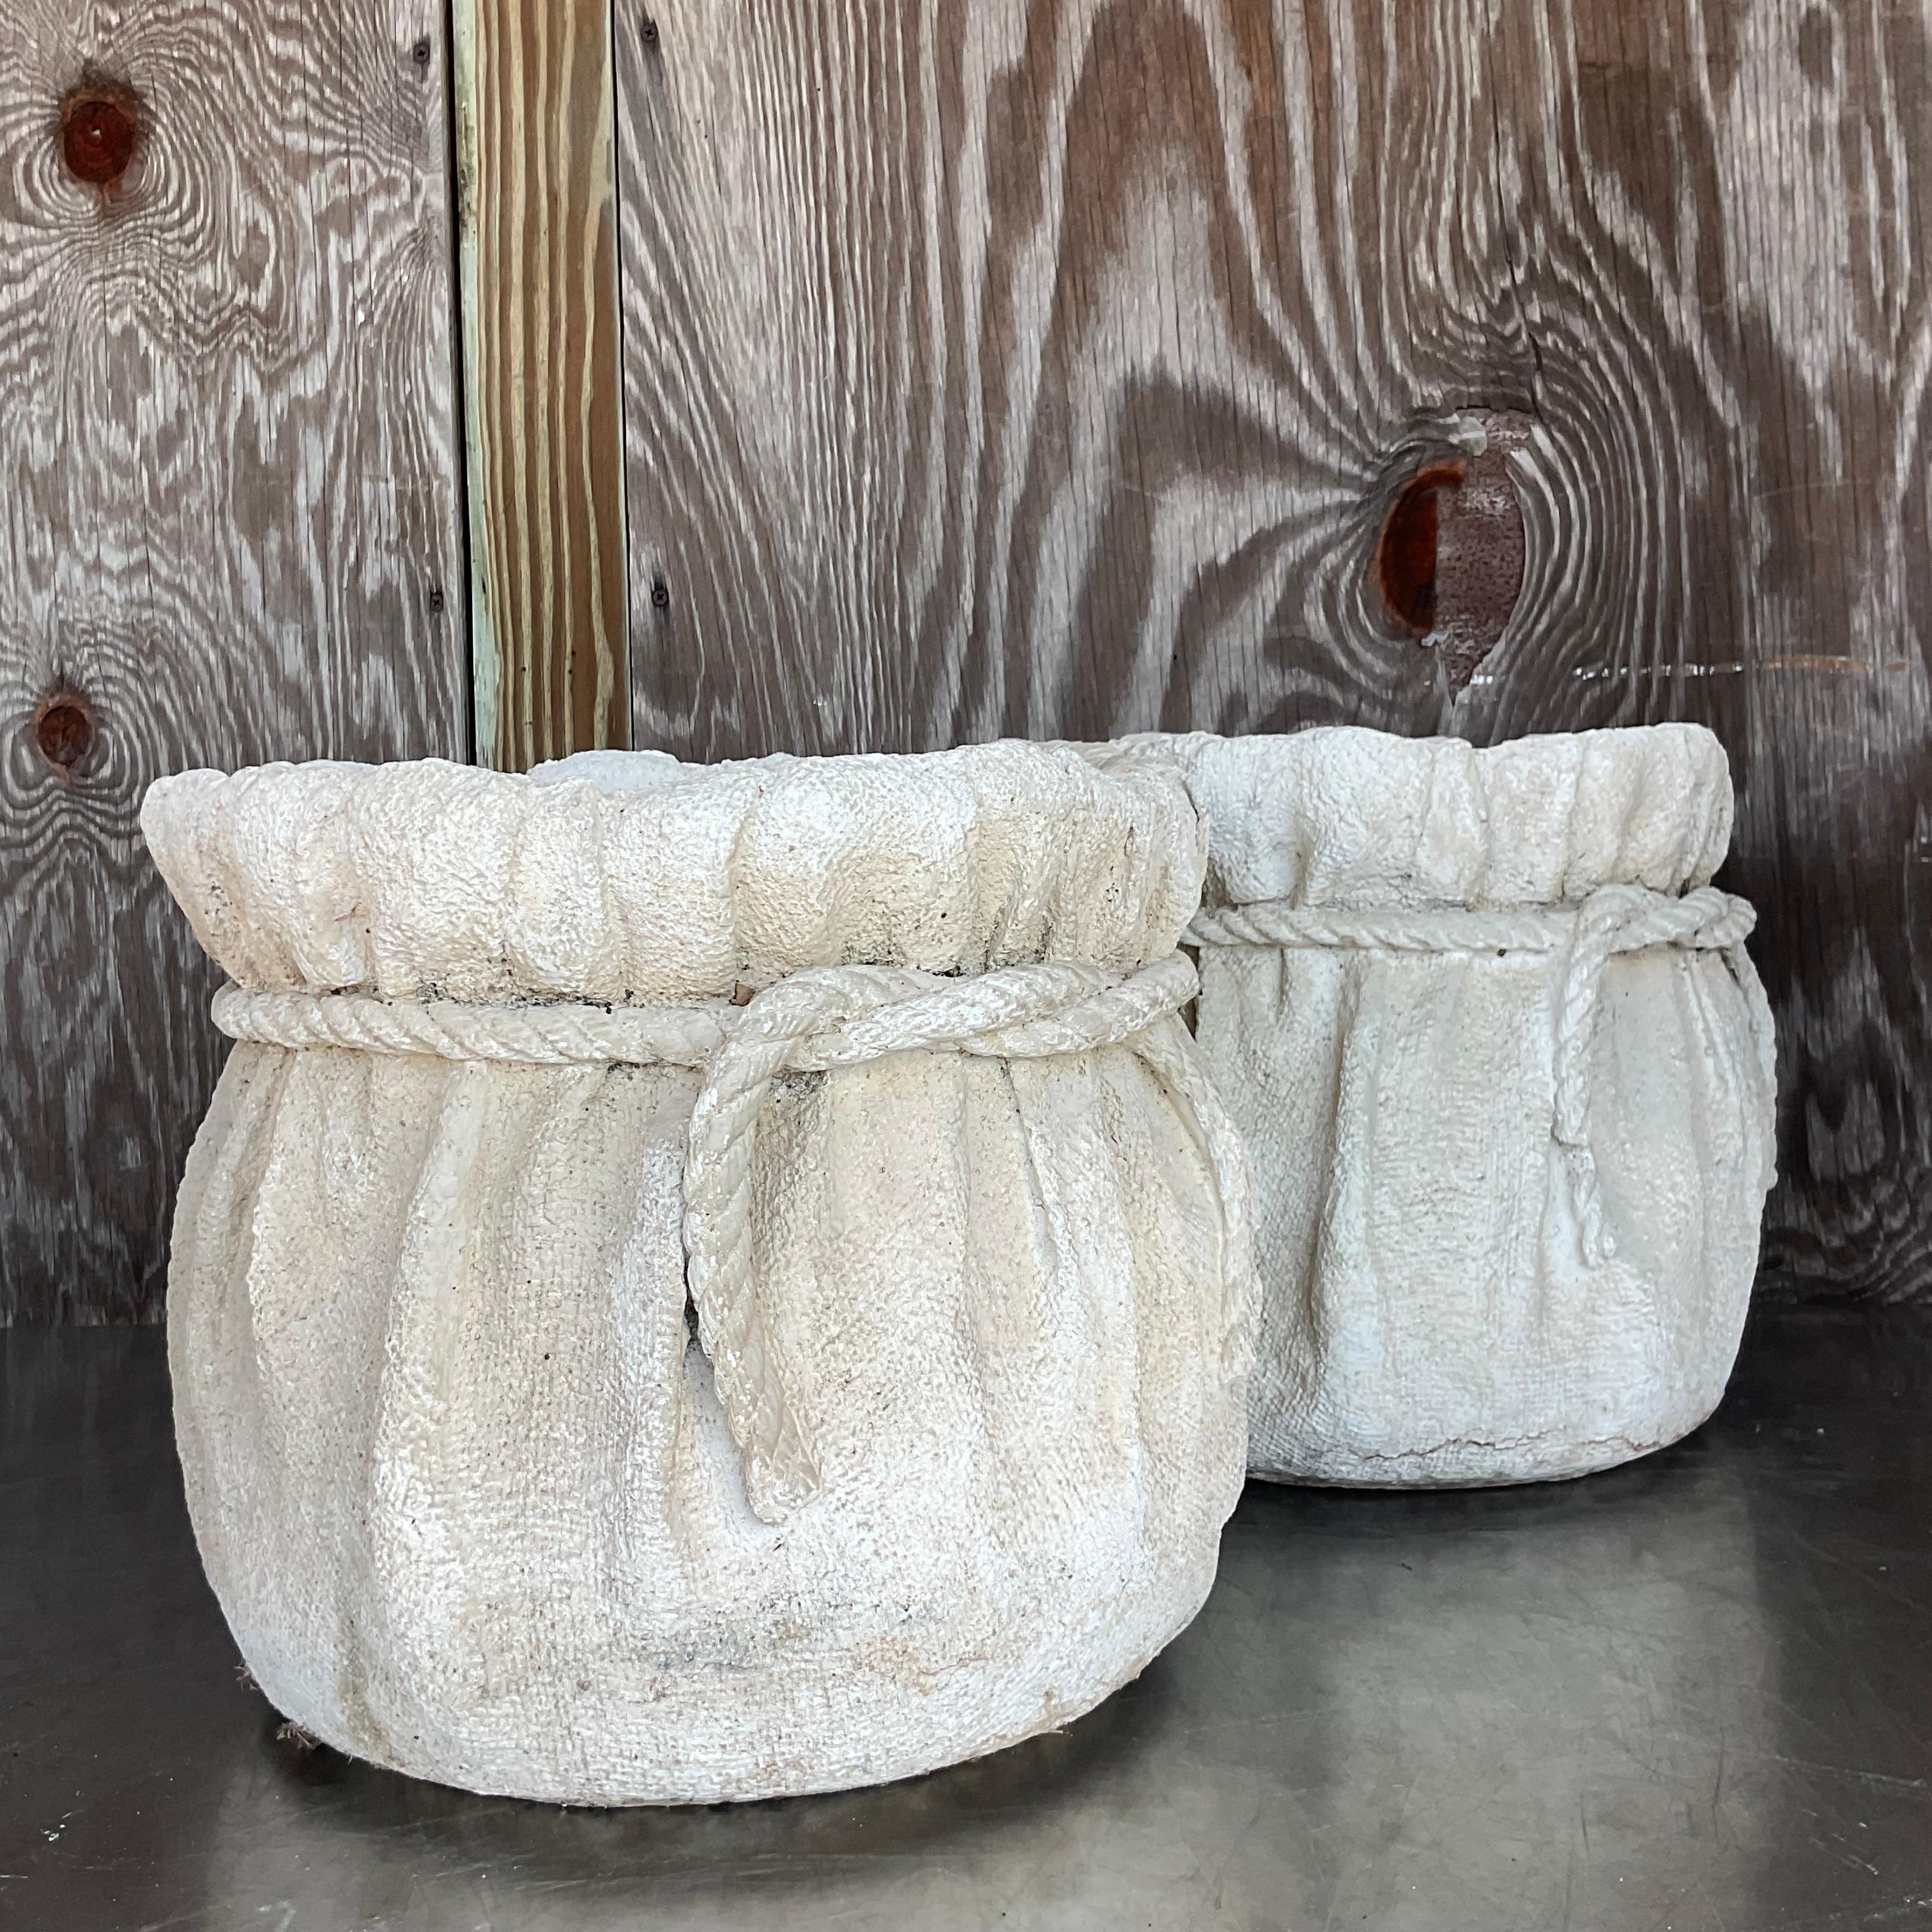 Elevate your greenery with a touch of bohemian charm and American craftsmanship! This pair of vintage painted terra cotta rope planters adds rustic elegance to any space. With their hand-painted details and natural textures, these planters bring a